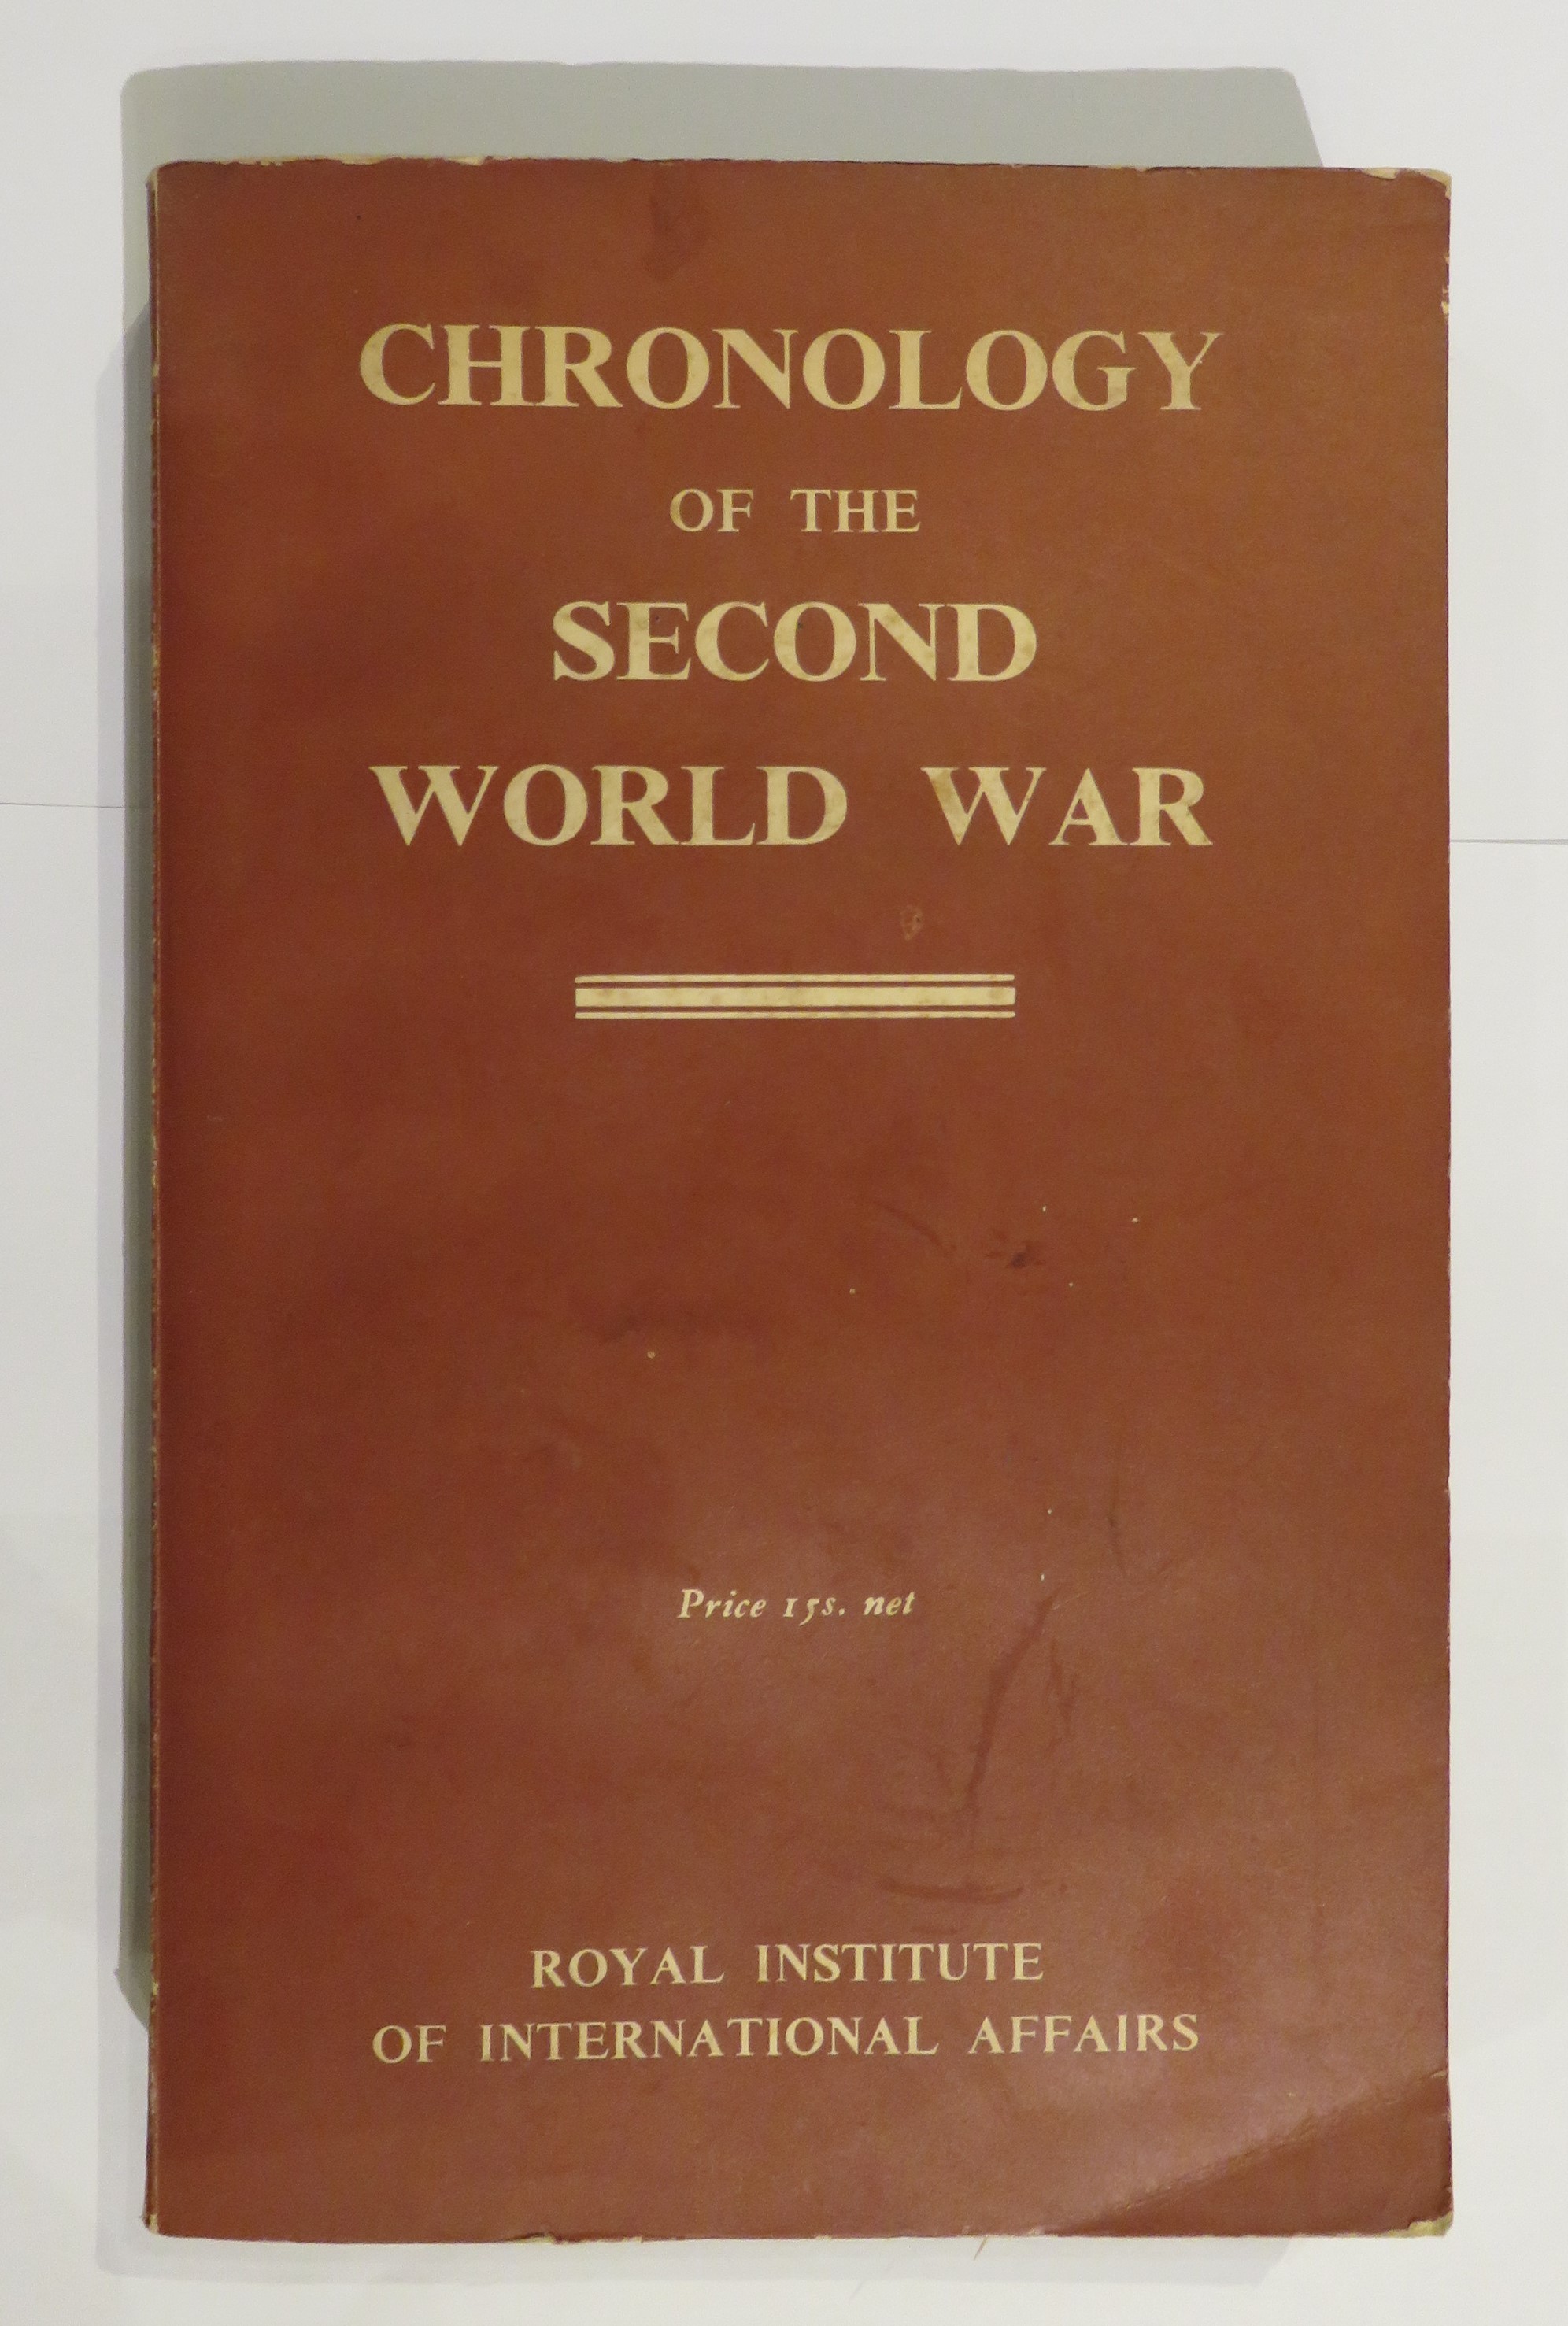 Chronology of the Second World War